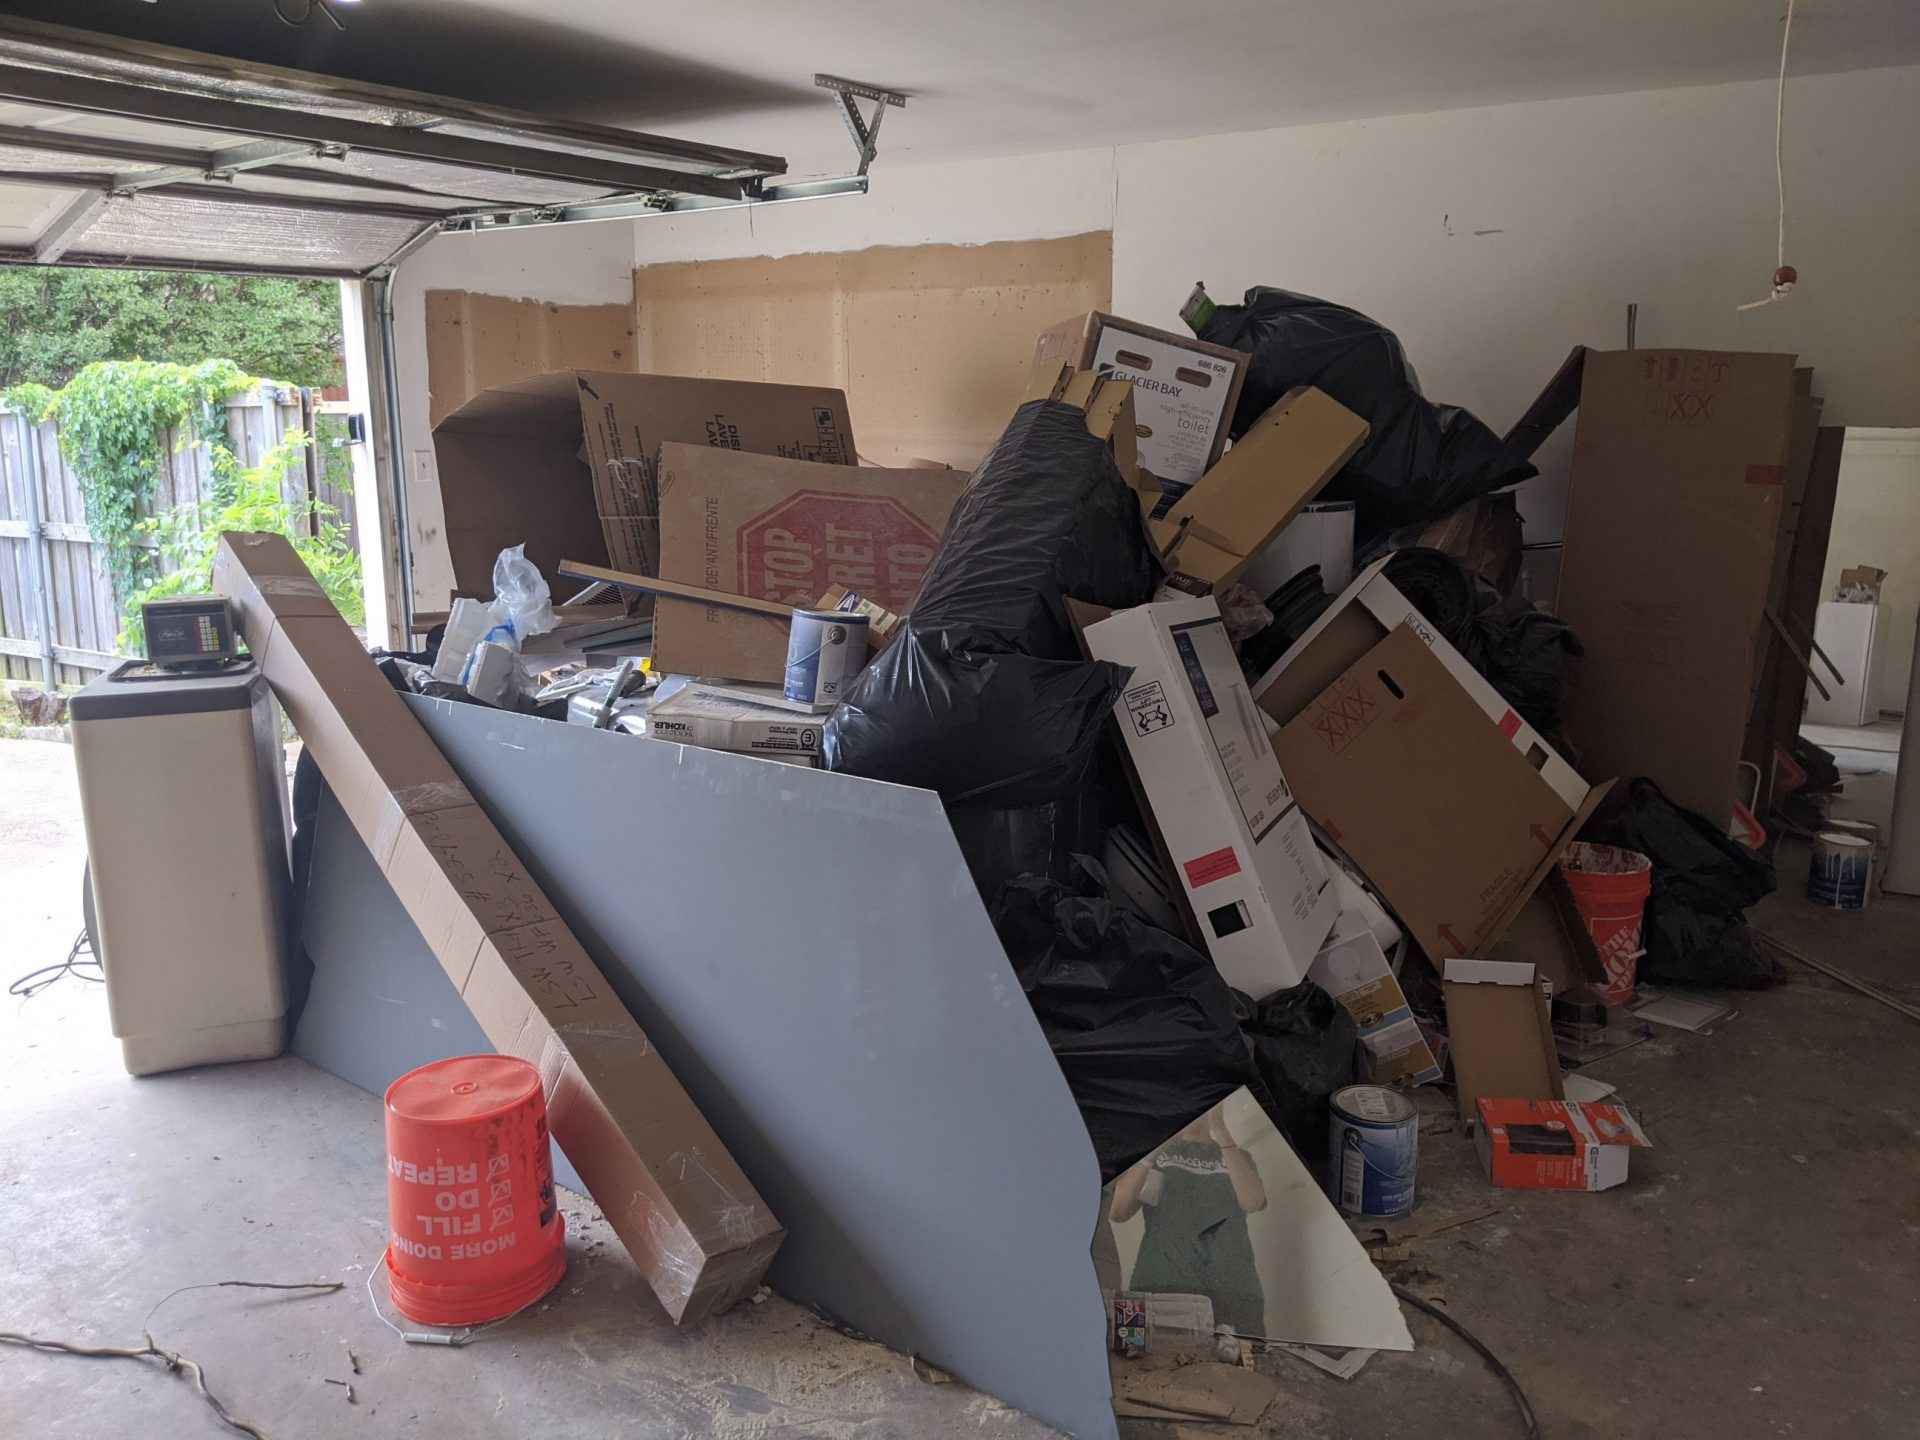 Dumpsters Rental & Junk Removal in Fort Worth, TX